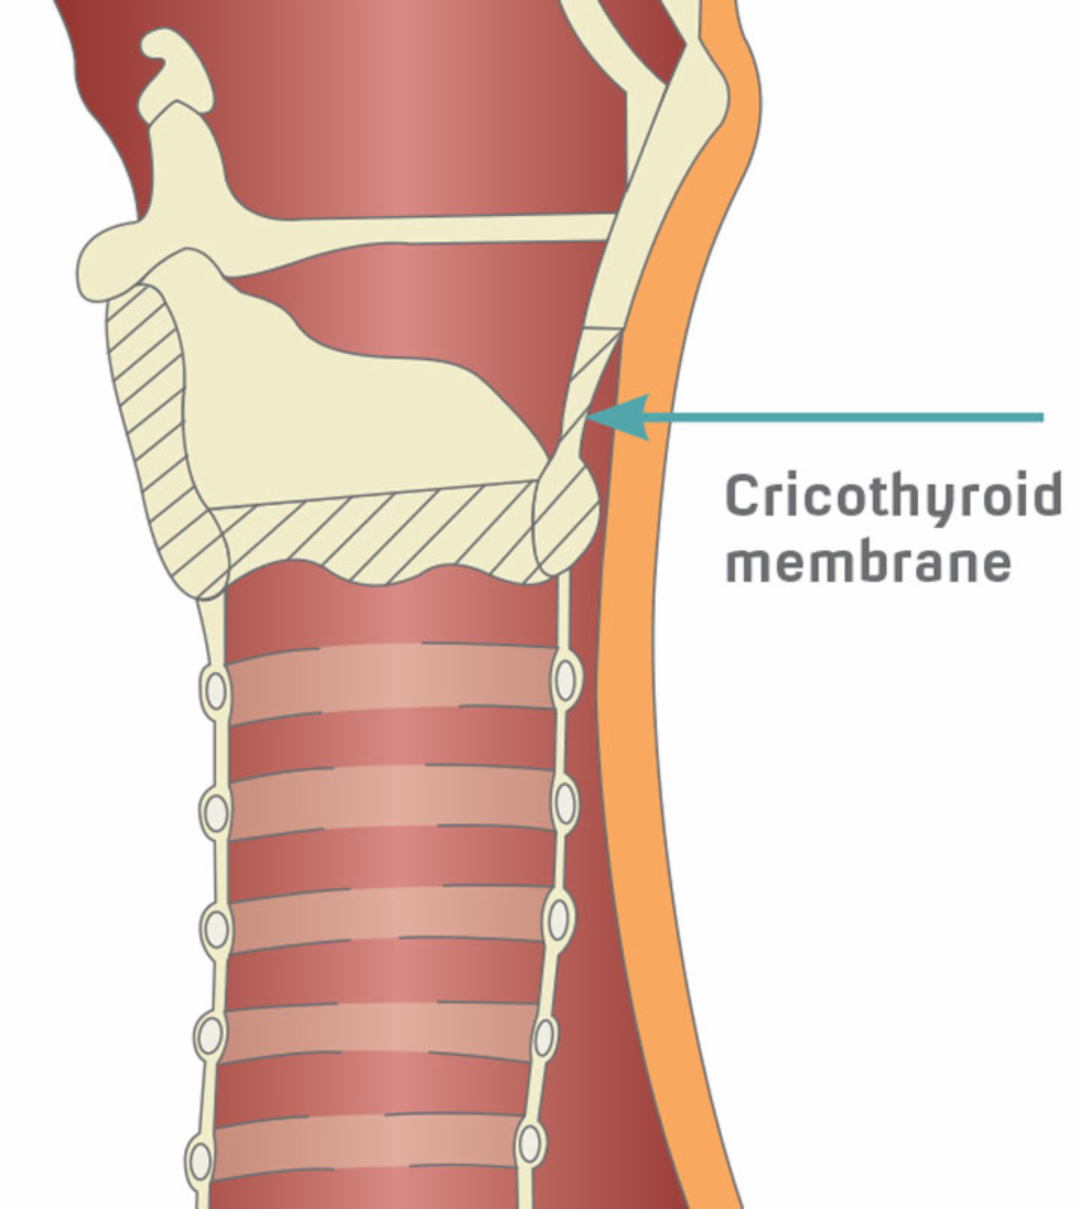 image of diagram of cricothyroid membrane